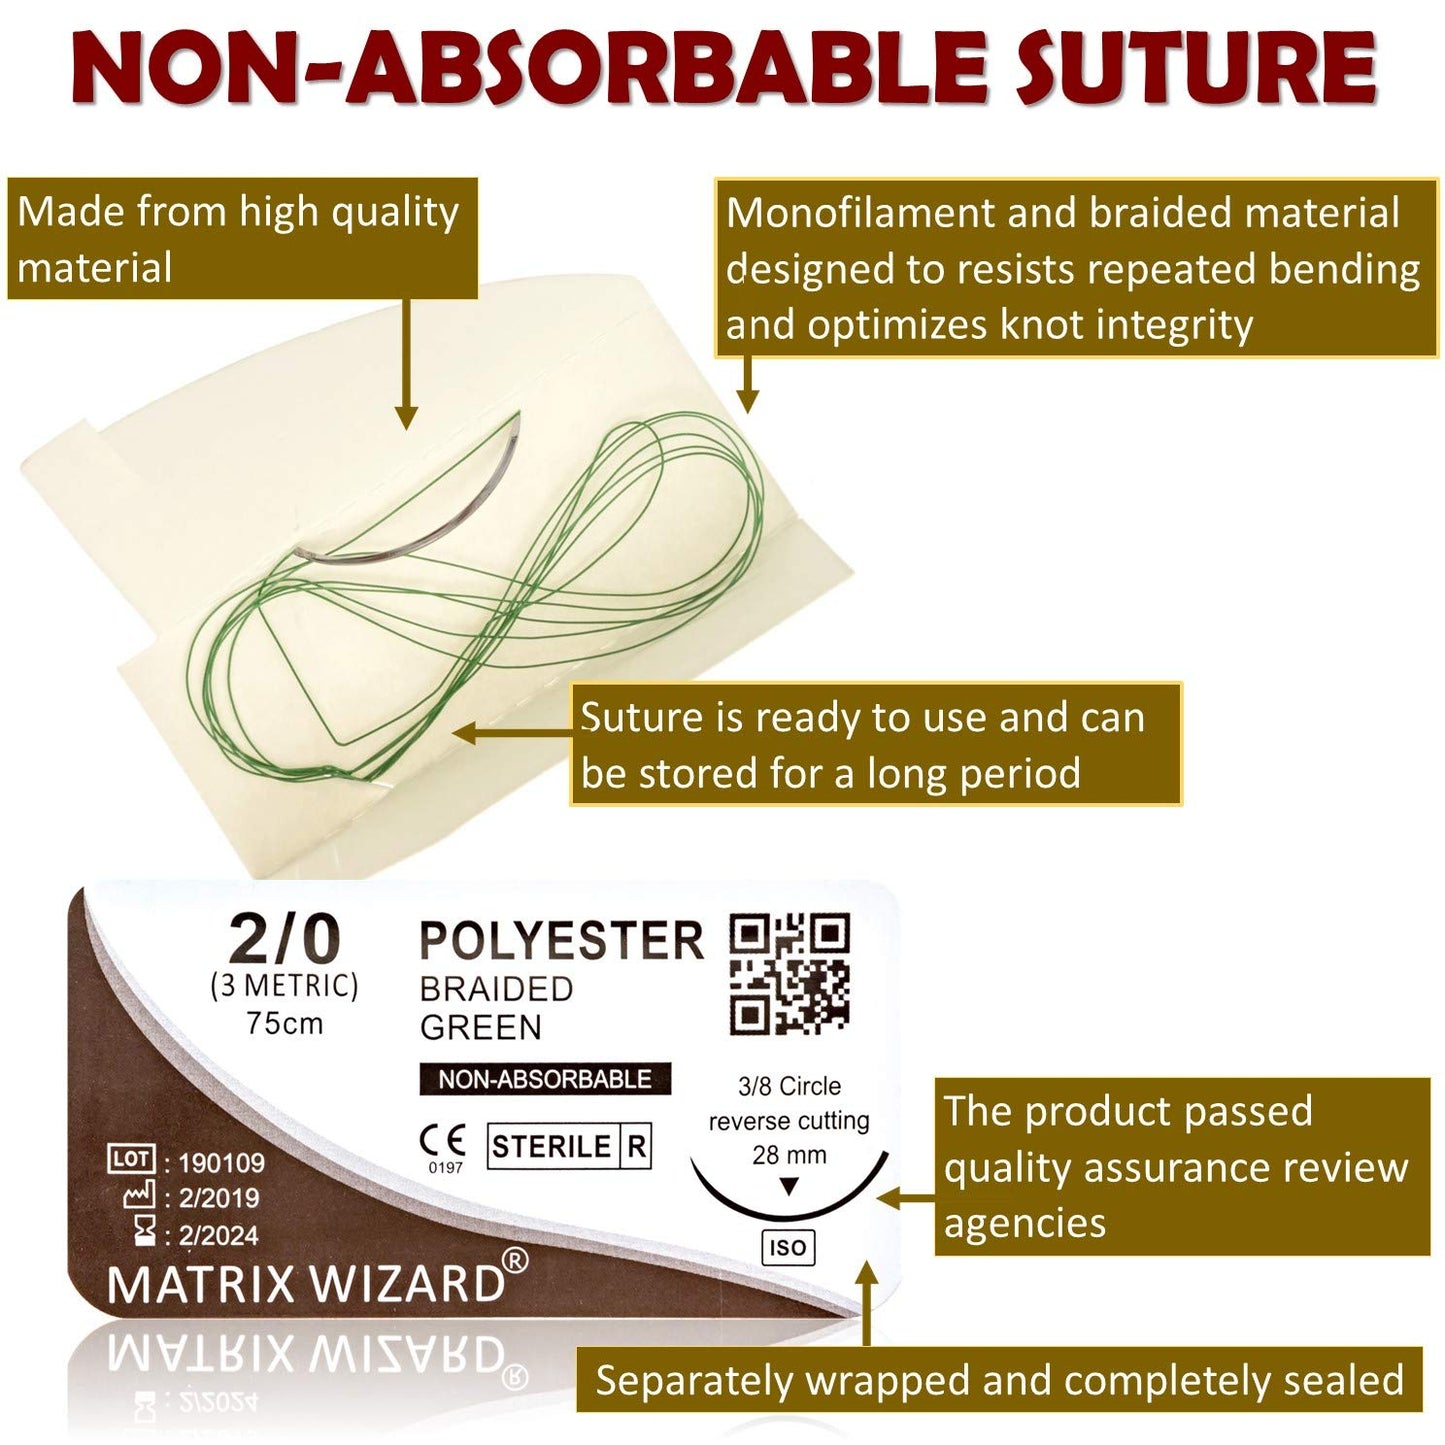 Mixed Sutures Thread with Needle (Absorbable: Chromic Catgut; Non-Absorbable: Nylon, Silk, Polyester, Polypropylene) - Surgical Wound Practice Kit, Taxidermy, Suture Pad Training (2-0, 3-0, 4-0, 5-0) 24PK